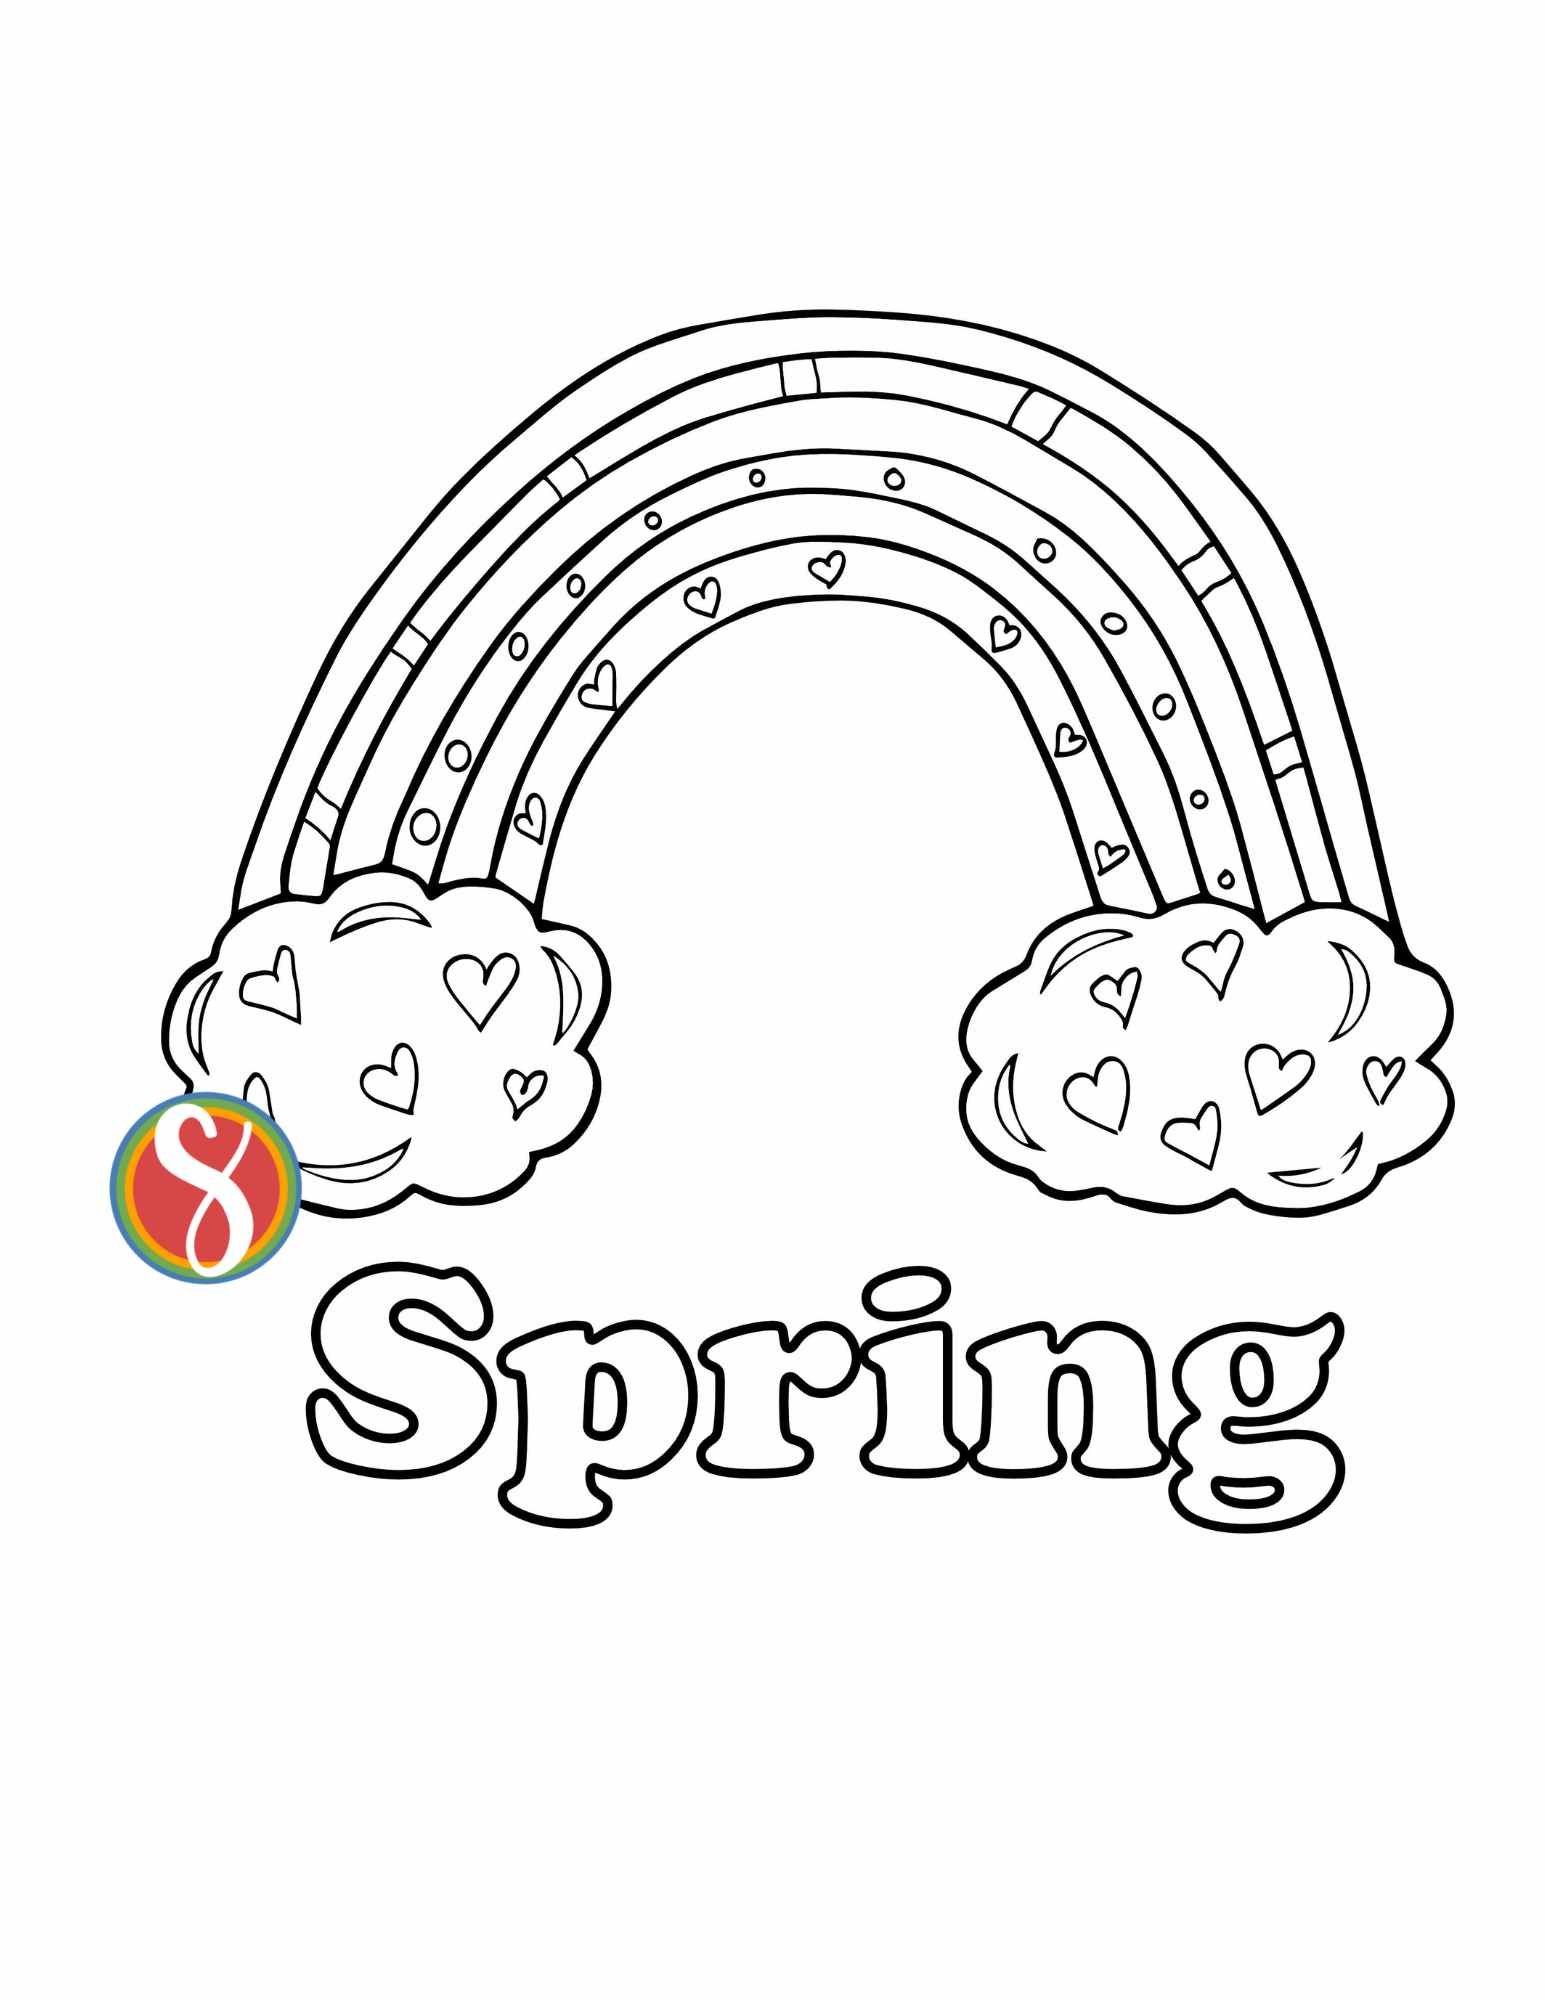 Free spring coloring pages â stevie doodles